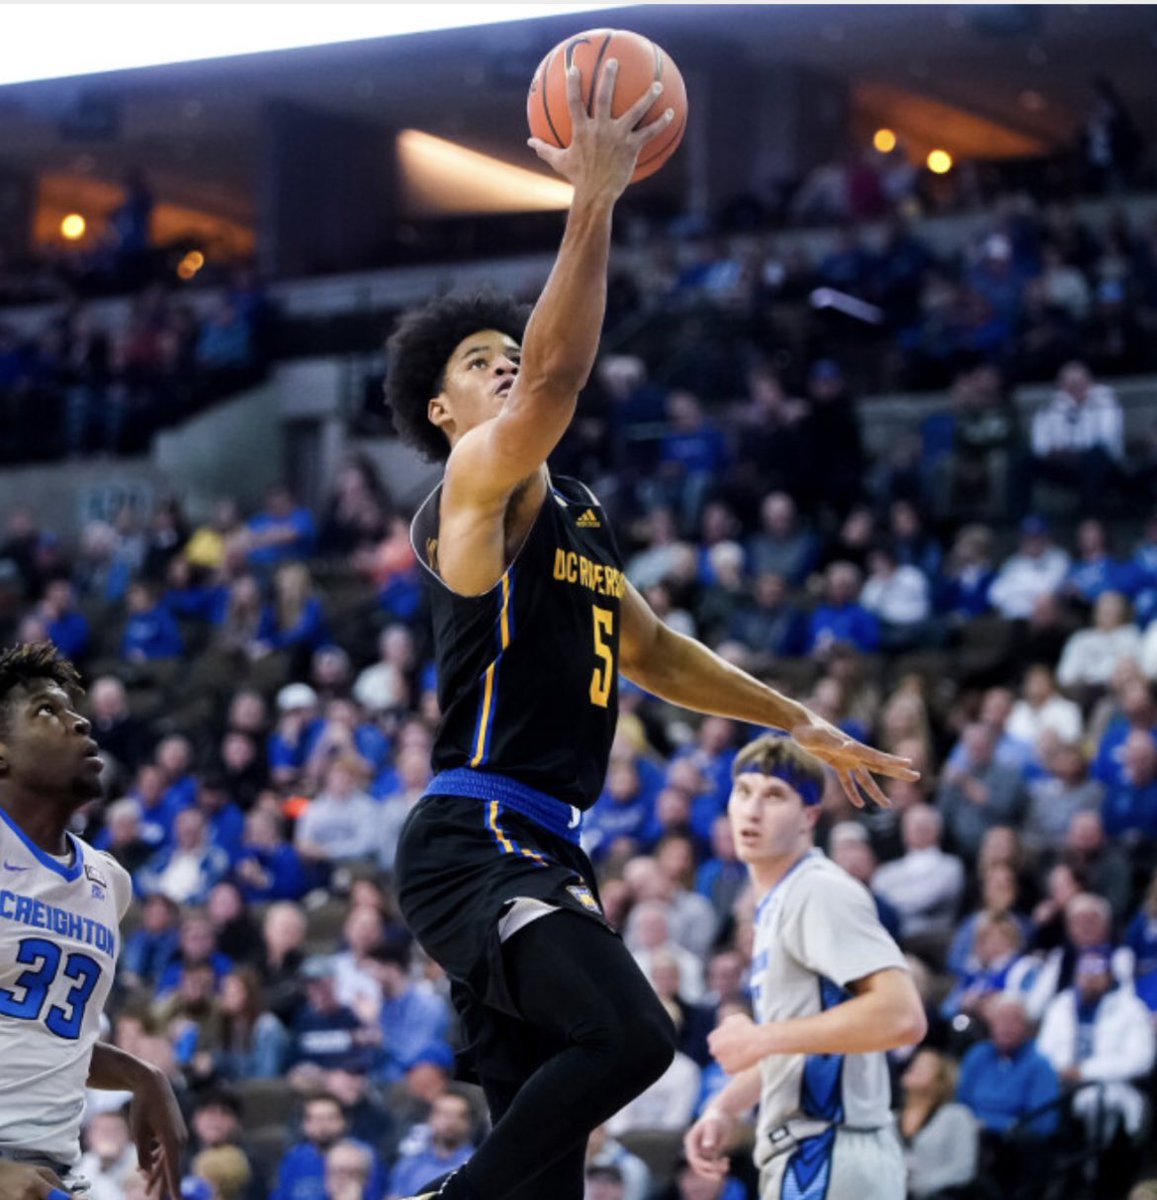 NEWS: UC Riverside guard Zyon Pullin is withdrawing from the NBA draft and remains in the transfer portal, his agent, Scott Nichols, told ESPN. Just finished workout with the Pistons.

Pullin has cut his list to five schools: 
• Florida
• LSU
• Xavier
• Gonzaga
• Michigan